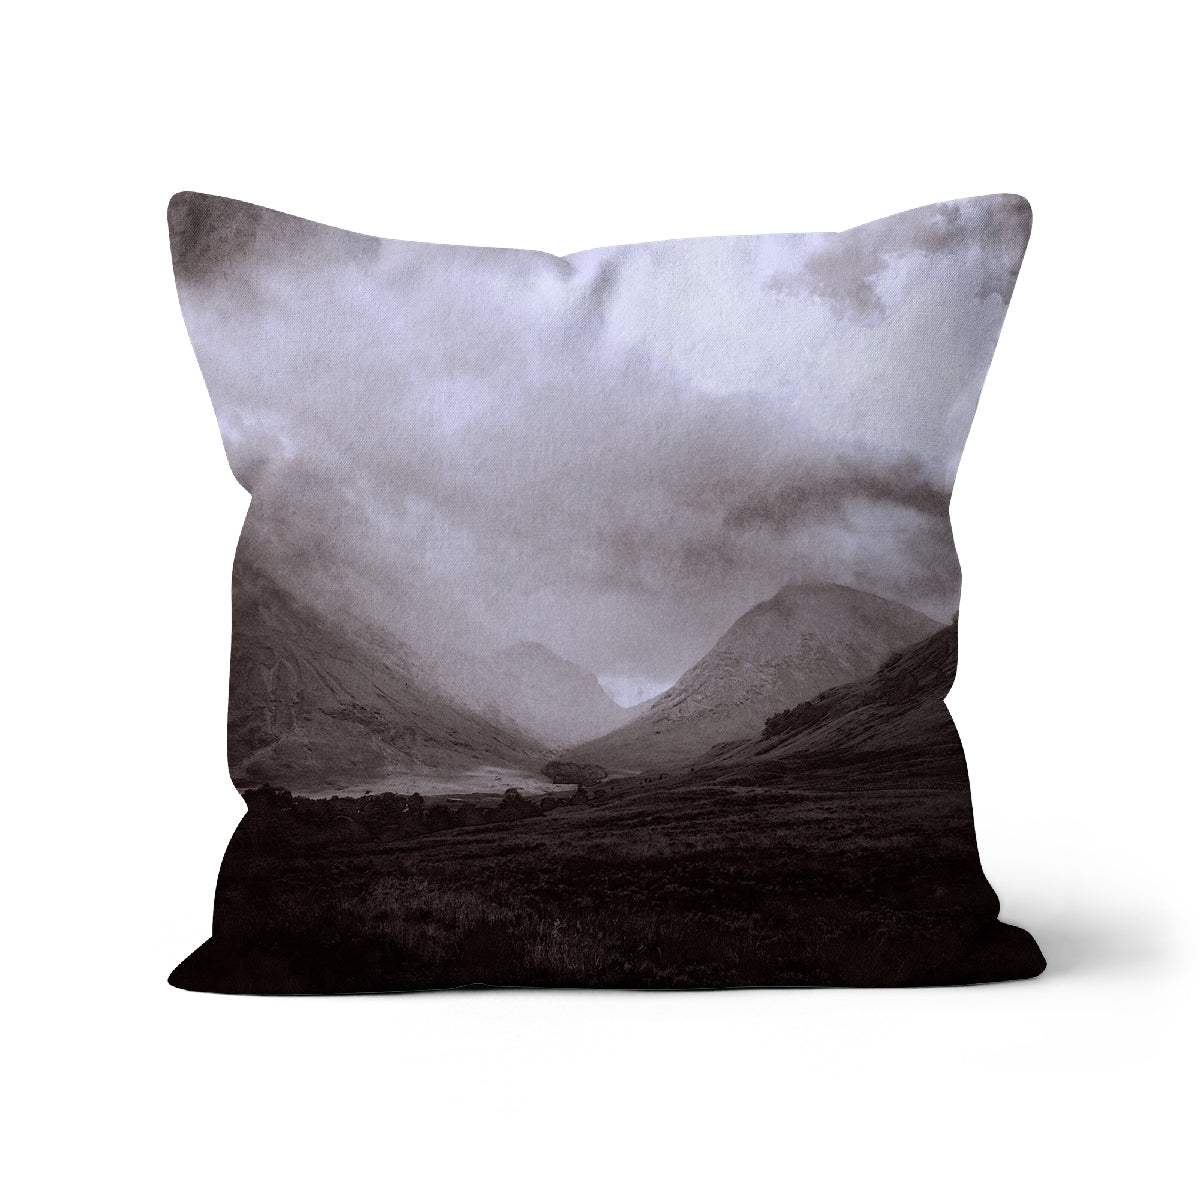 Glencoe Mist Art Gifts Cushion-Cushions-Glencoe Art Gallery-Faux Suede-12"x12"-Paintings, Prints, Homeware, Art Gifts From Scotland By Scottish Artist Kevin Hunter